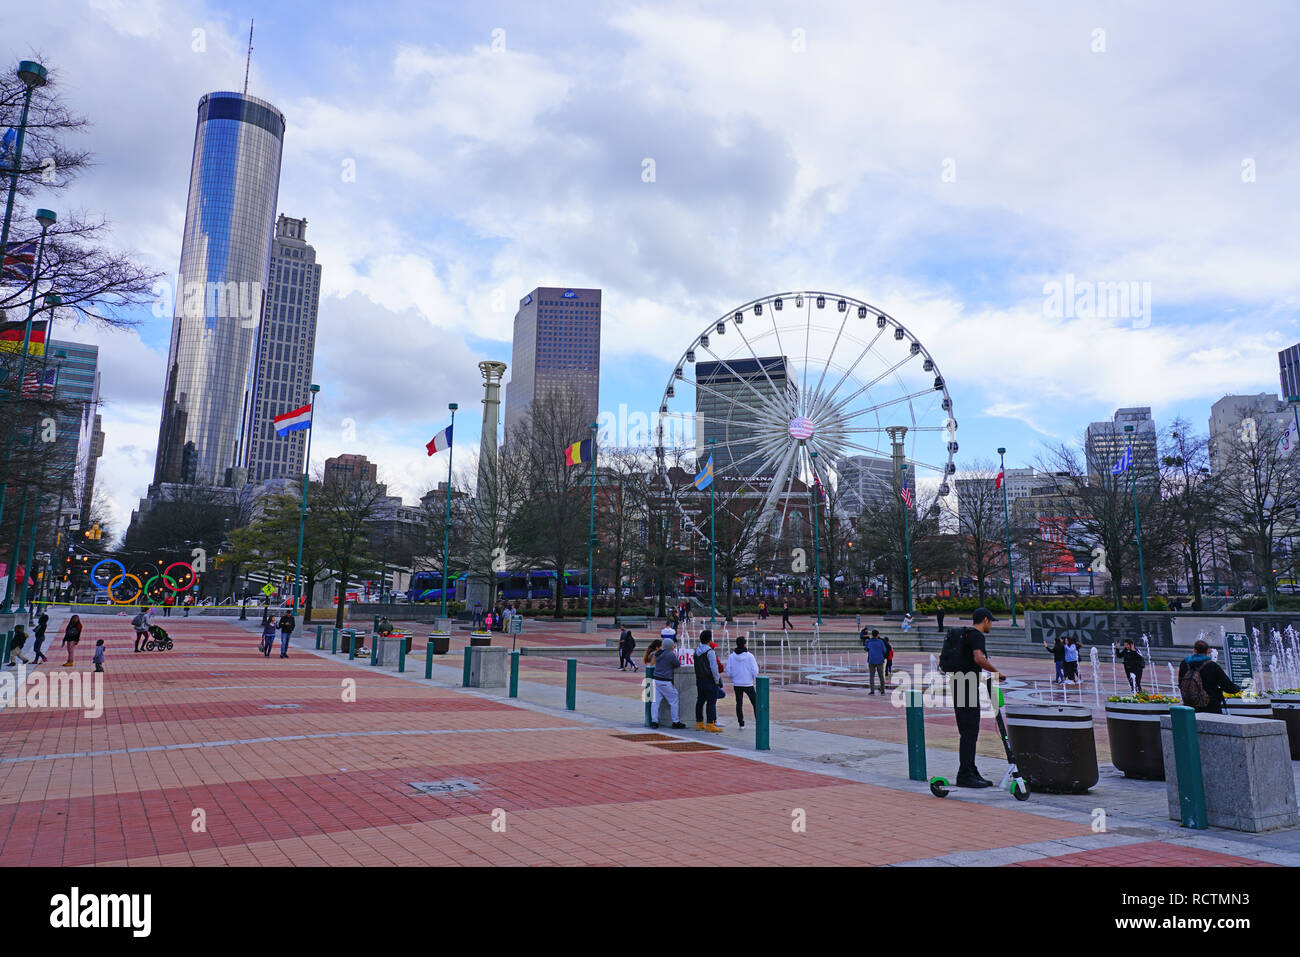 ATLANTA, GA- View of the Centennial Olympic Park, built for the 1996 Summer Olympics, located in downtown Atlanta, Georgia. Stock Photo